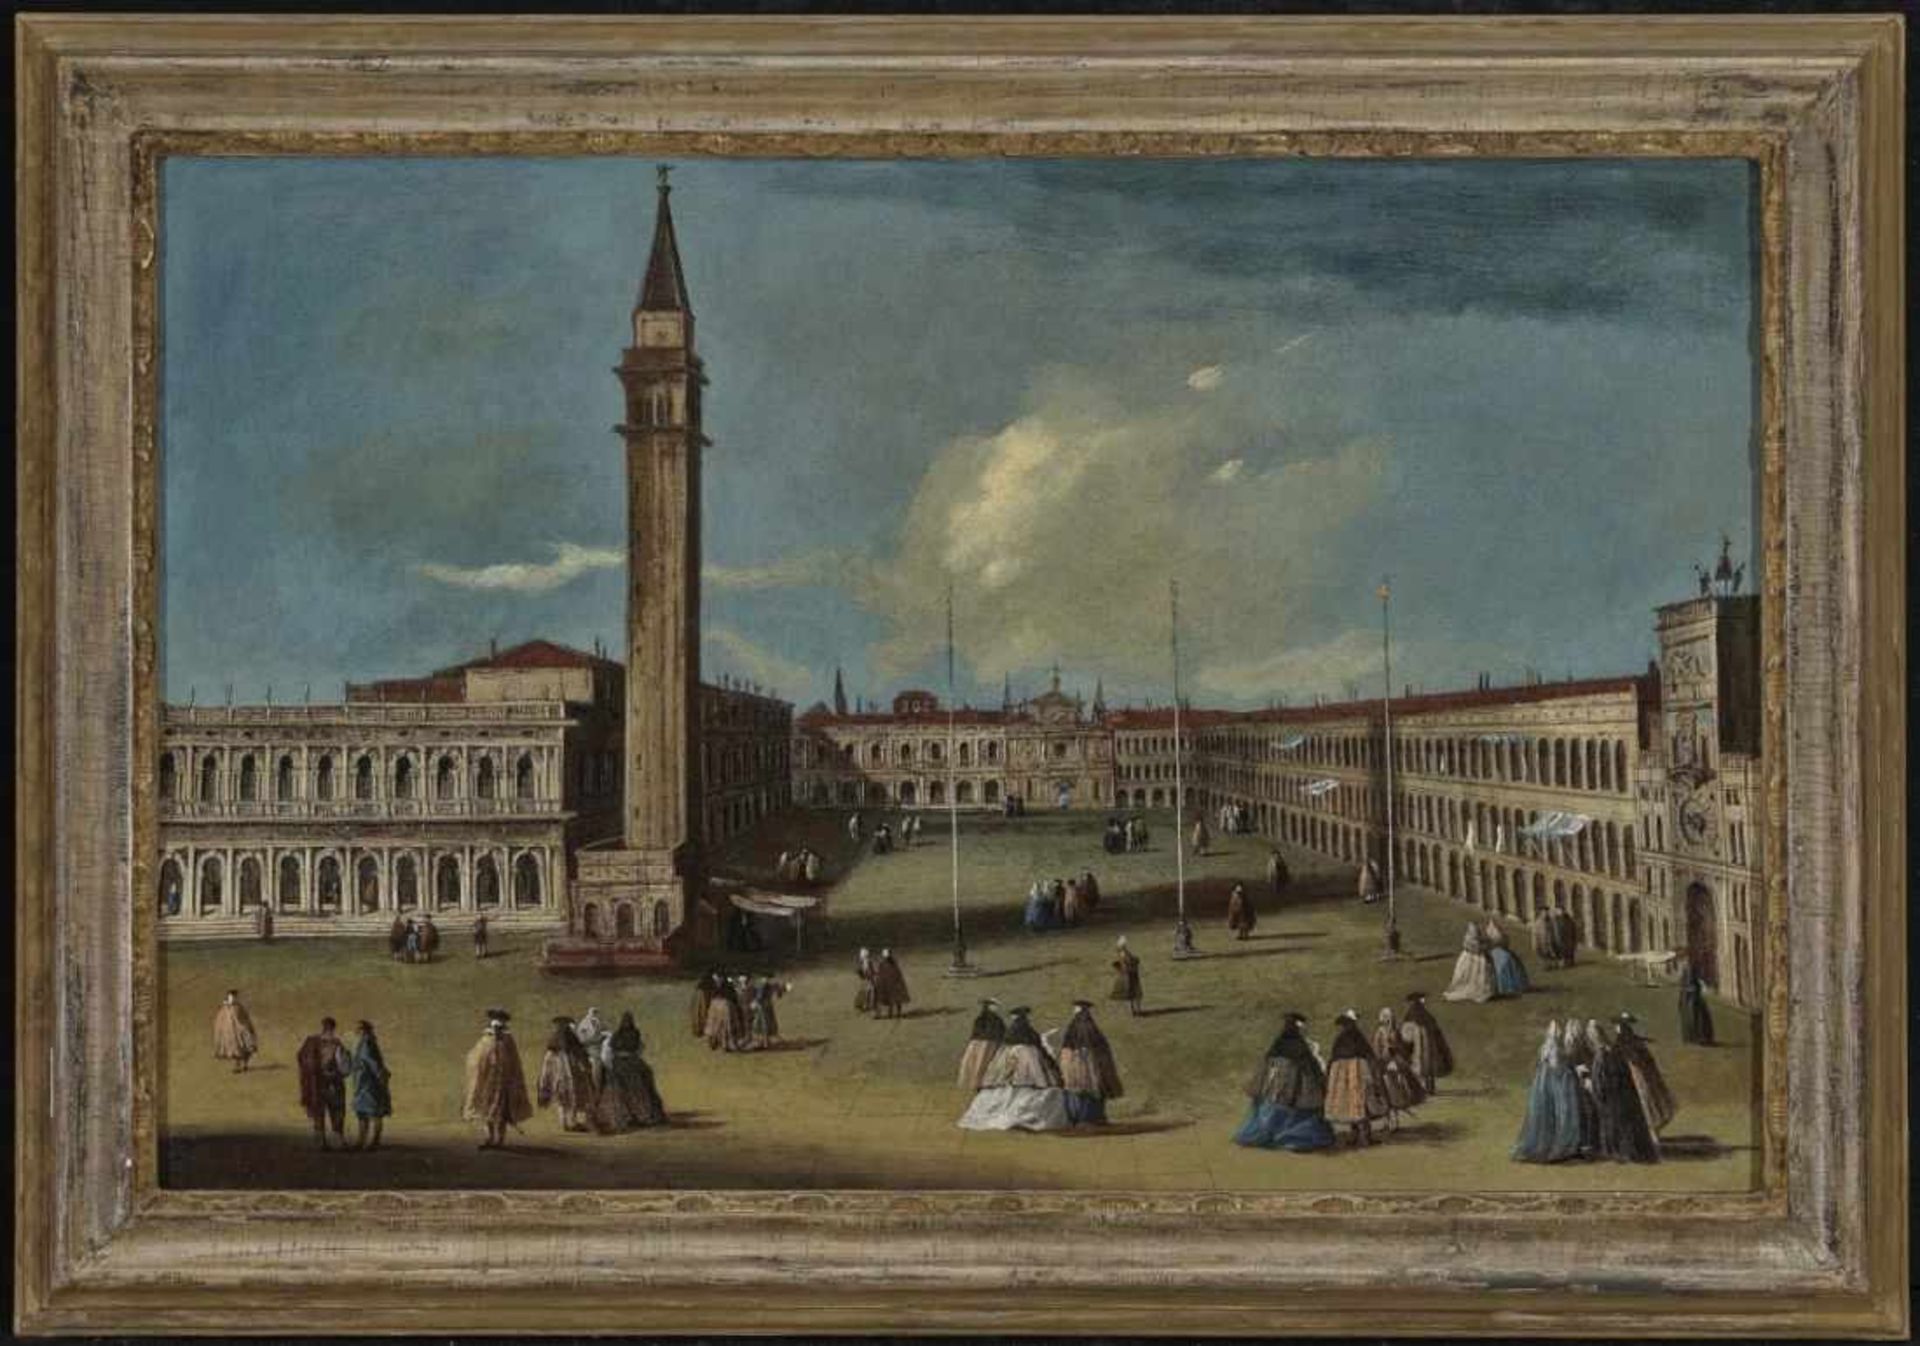 (Circle of) Canal, called Canaletto, Giovanni AntonioVenice - Piazza San Marco Oil on canvas. 47 x - Bild 2 aus 2